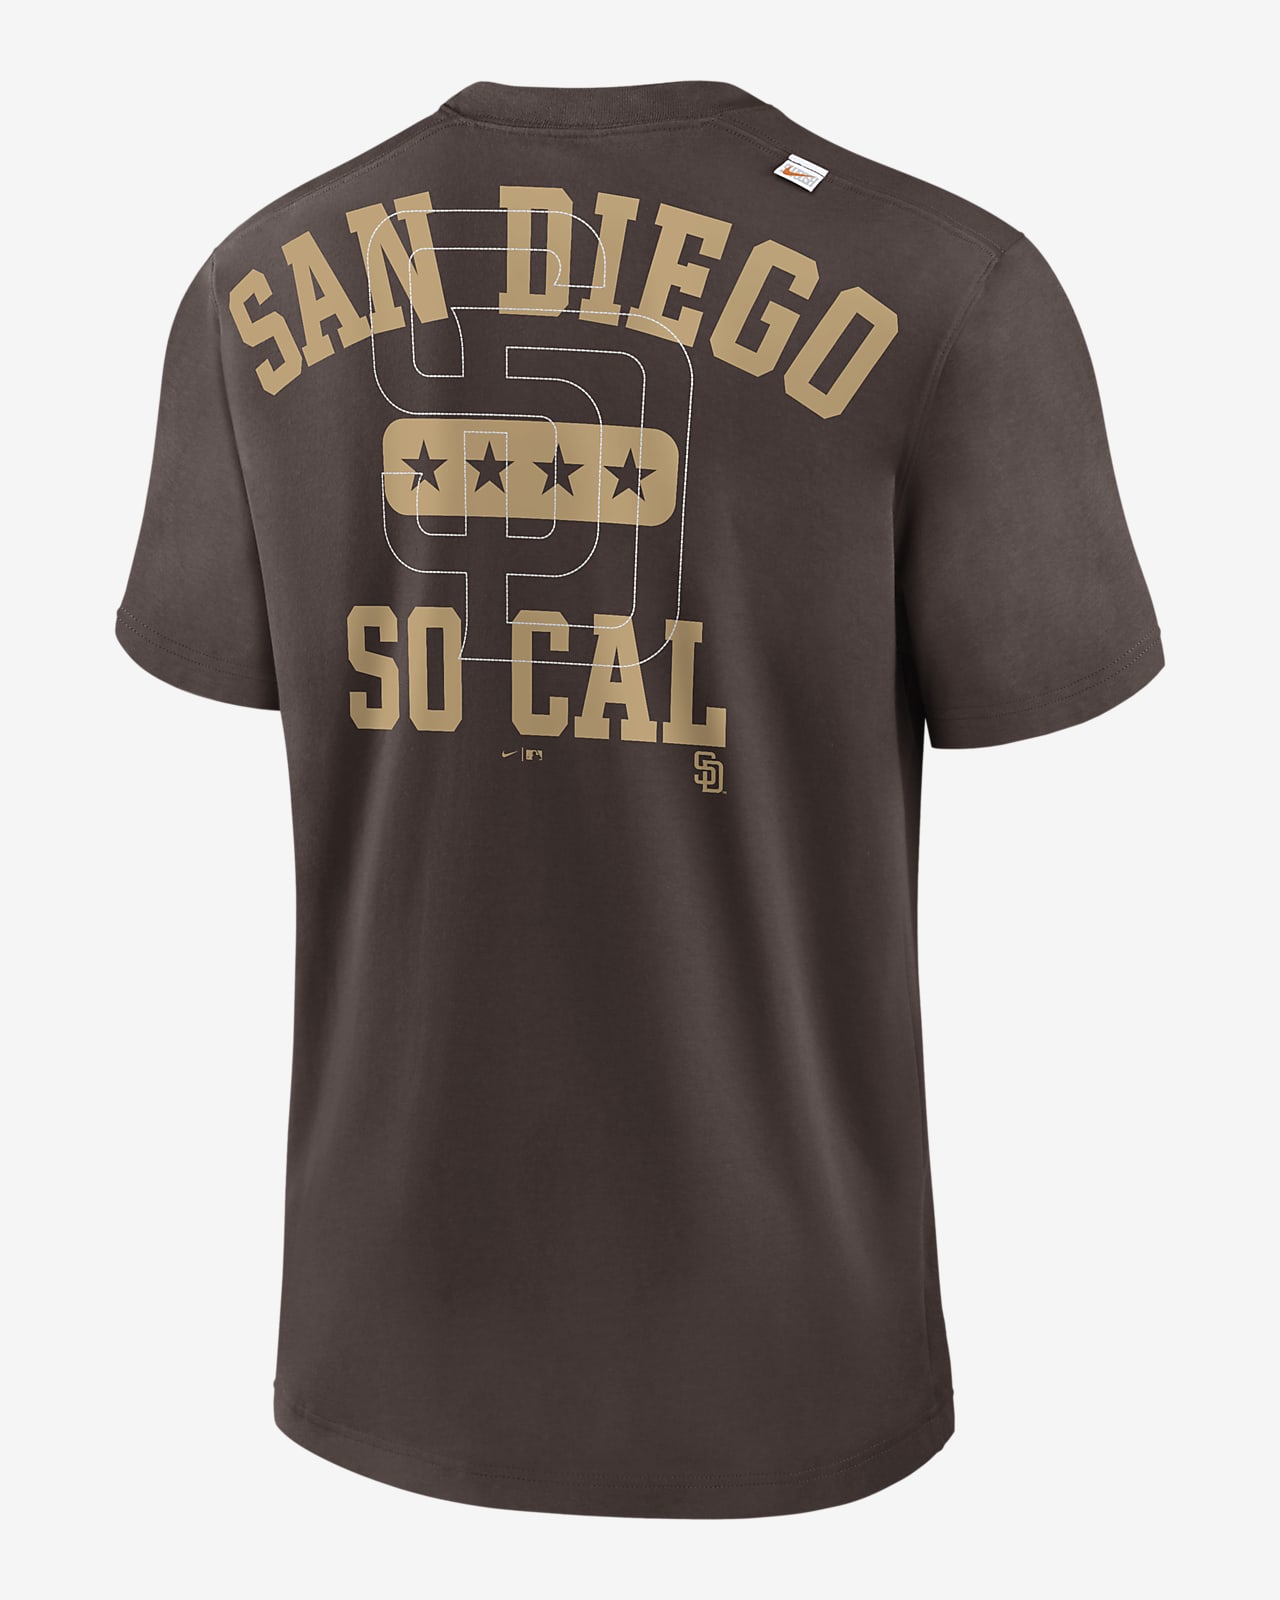 Nike Game Over San Diego Padres) Men's T-Shirt.